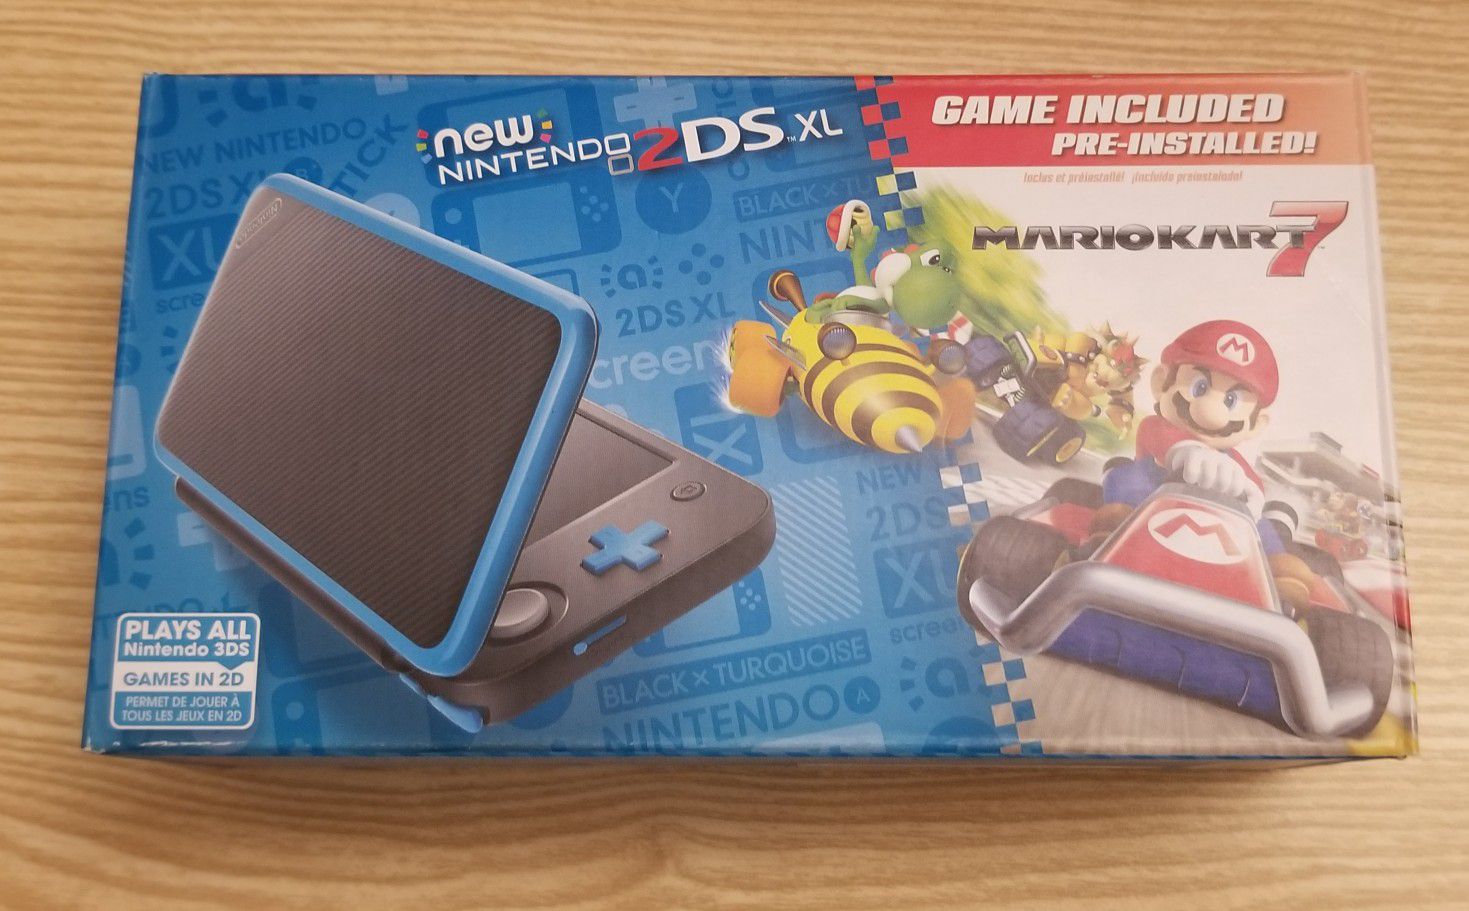 *new* Nintendo 2DS XL Black/Blue, 16gb SD card and 4 games